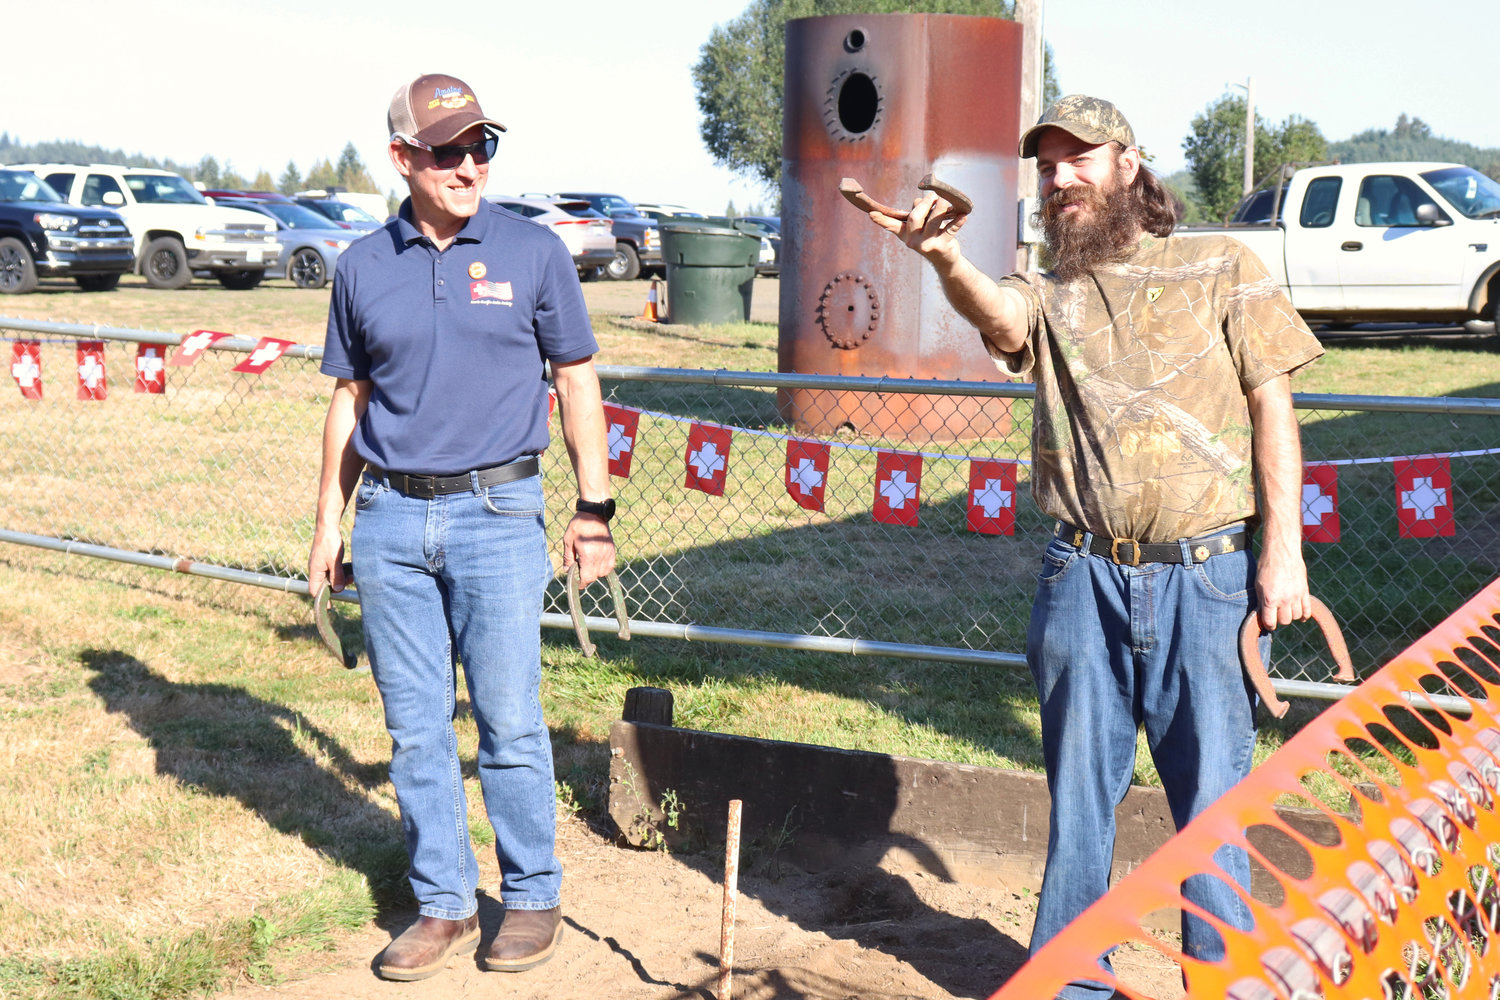 Alex Muller and Adrian Cook compete in a game of horseshoes during the Lewis-Pacific Swiss Society Oktoberfest in Frances on Saturday.